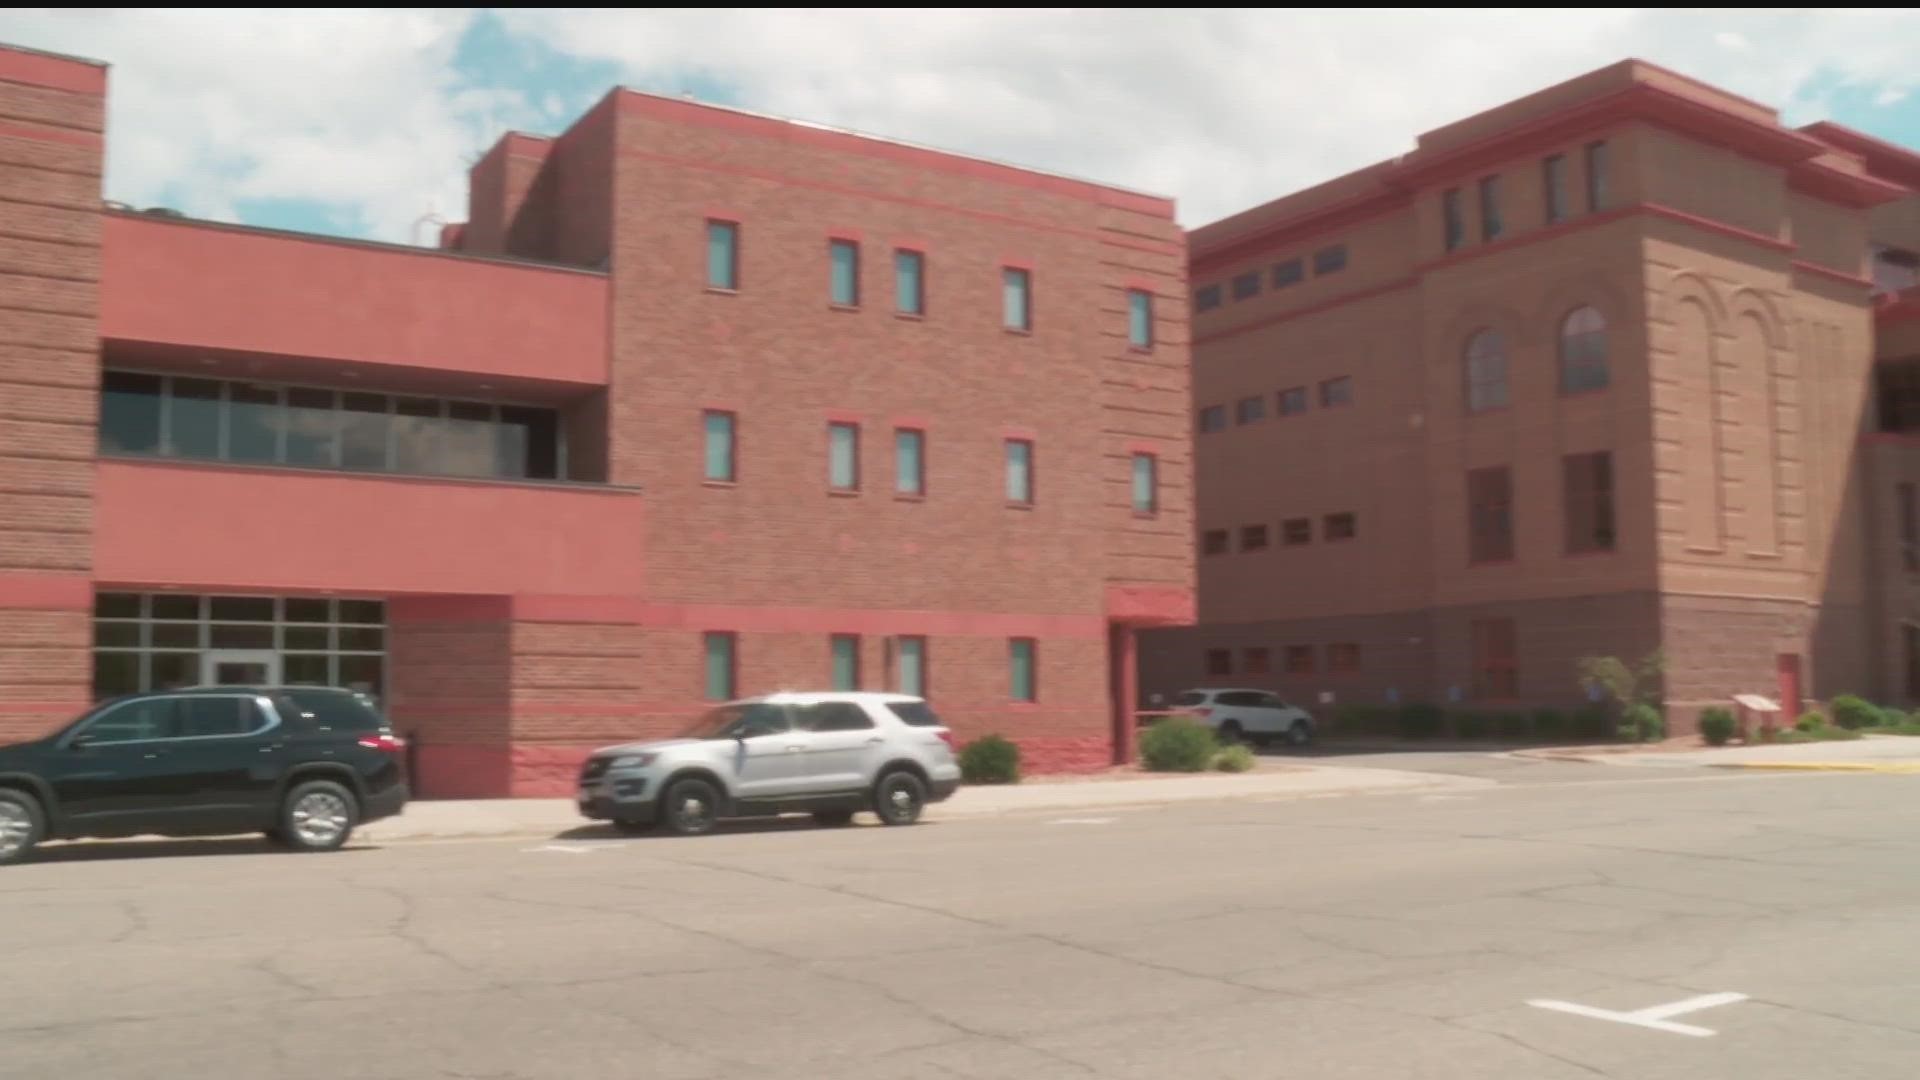 After jail staff tried to deny and delay emergency medical care for sick inmates, the jail has been ordered to reduce inmate capacity, according to state inspectors.